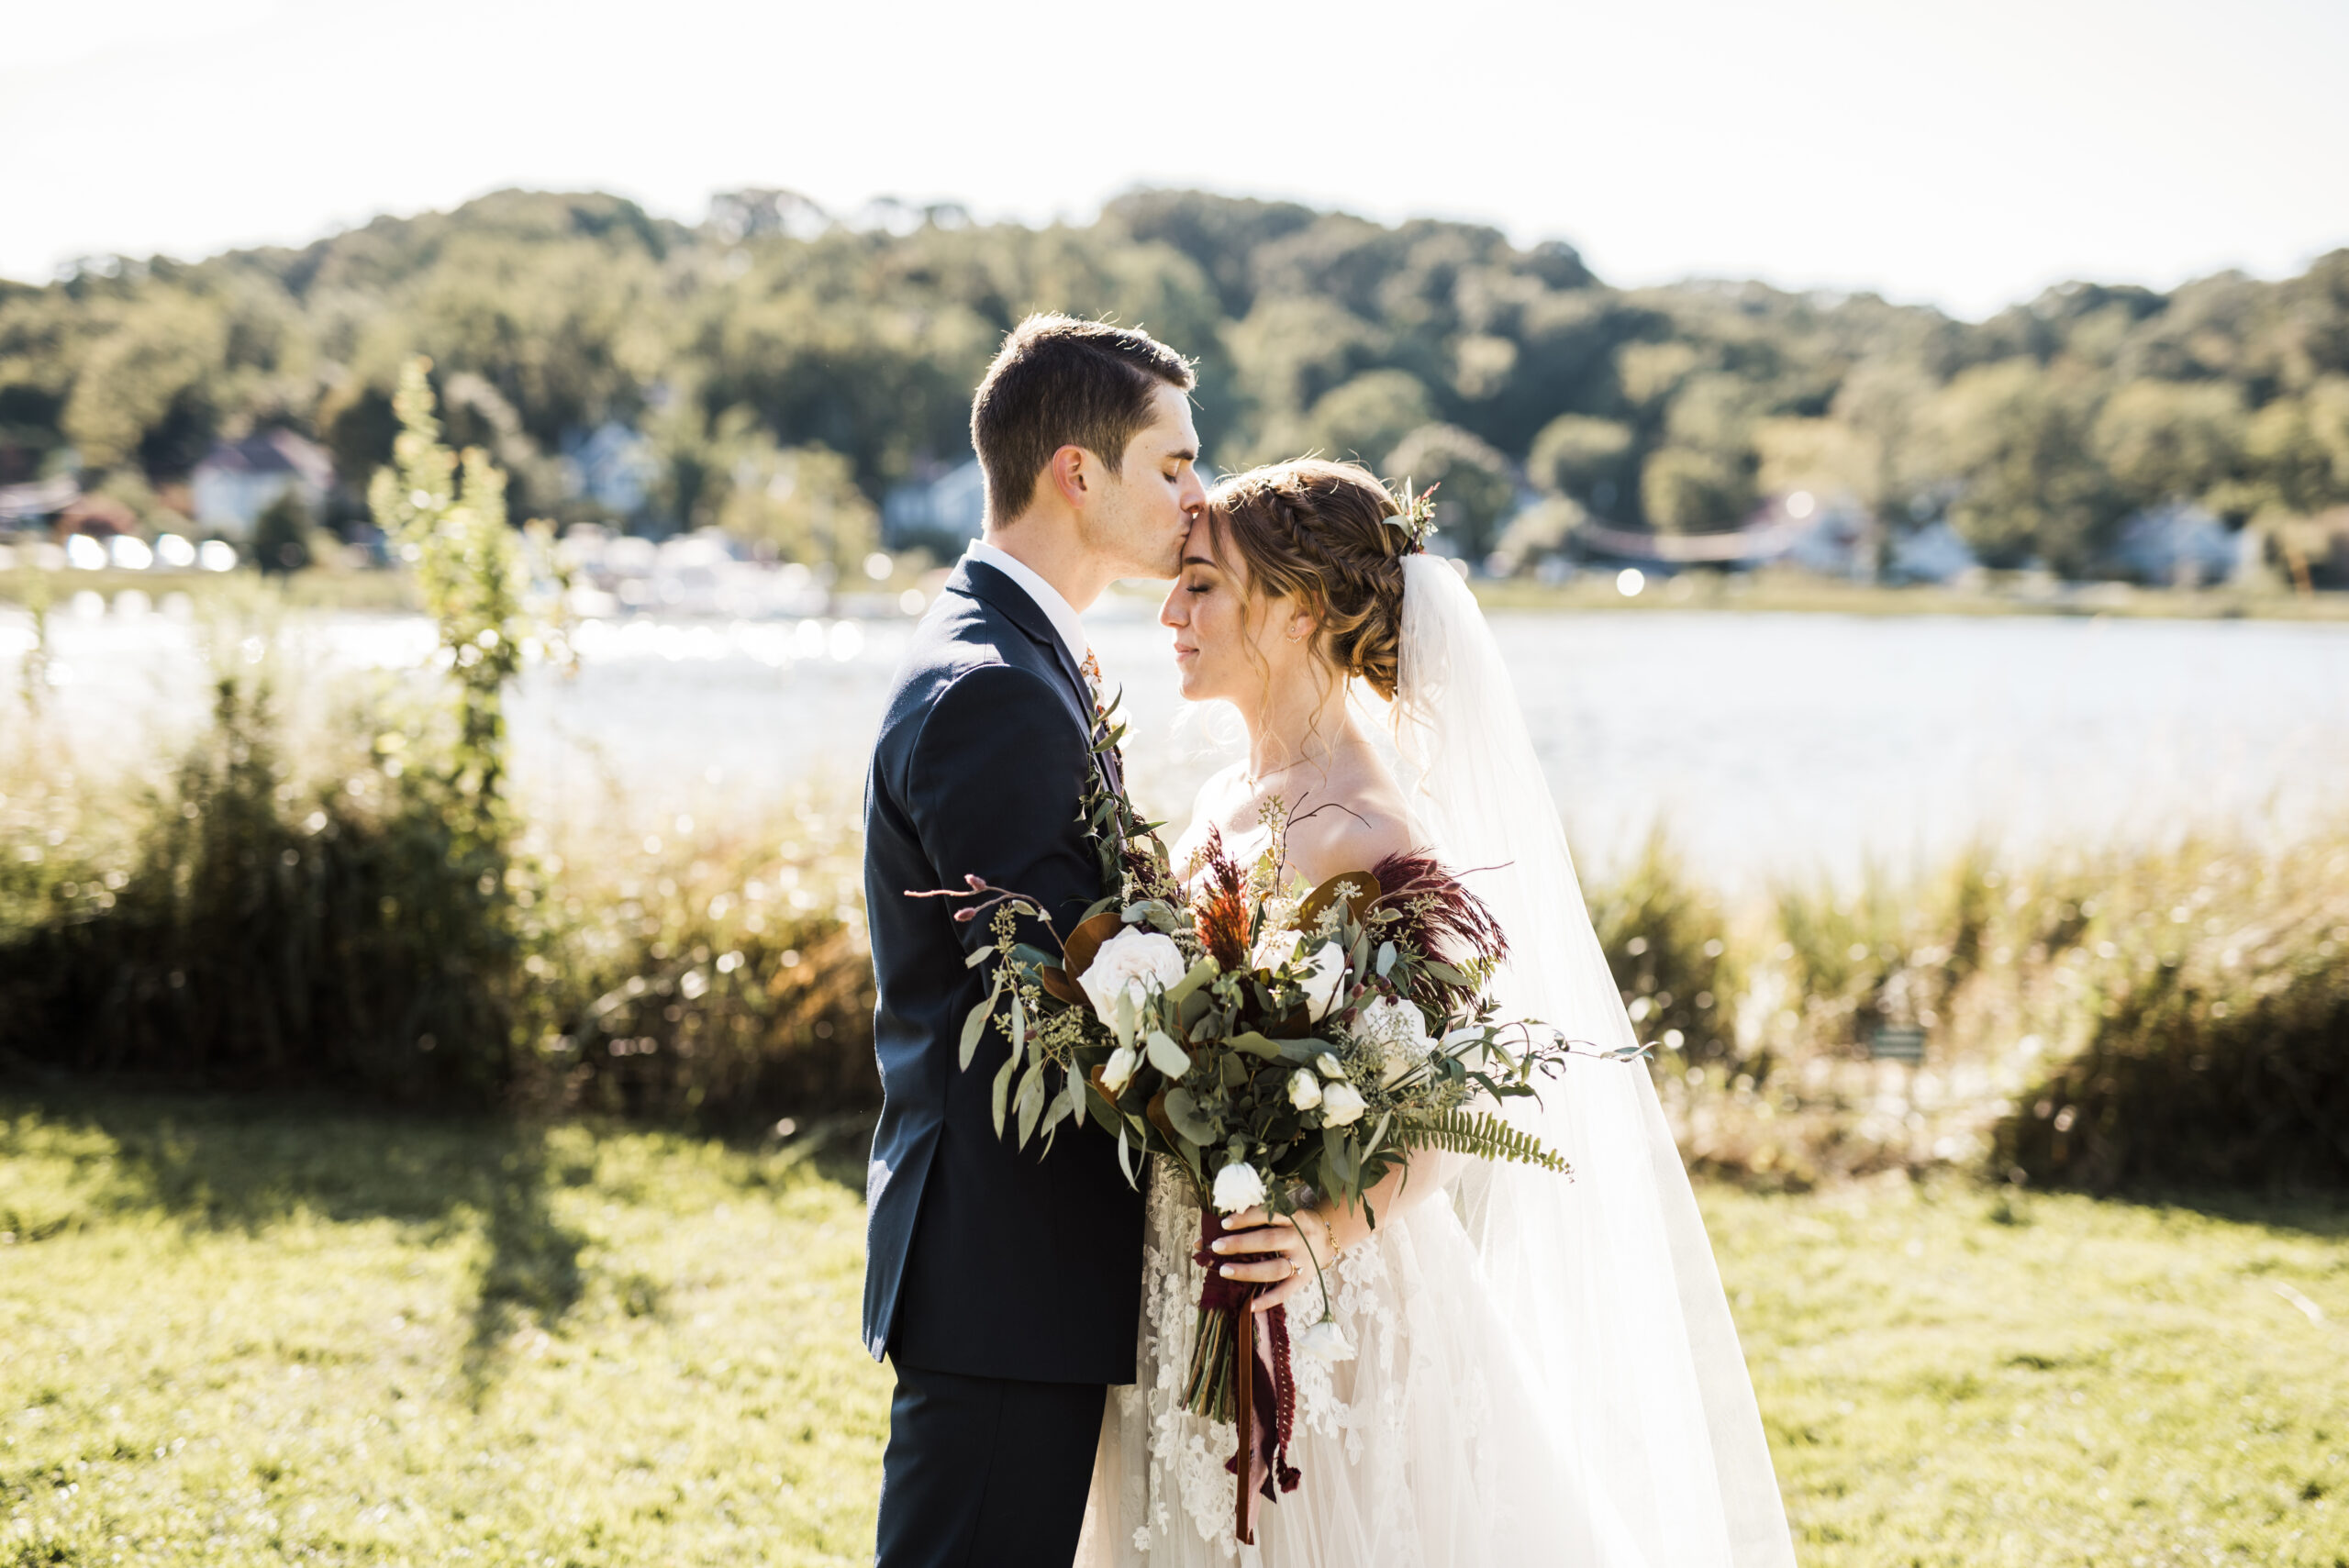 Relaxed and Intimate Celebration At A Private Beach in New York Wedding